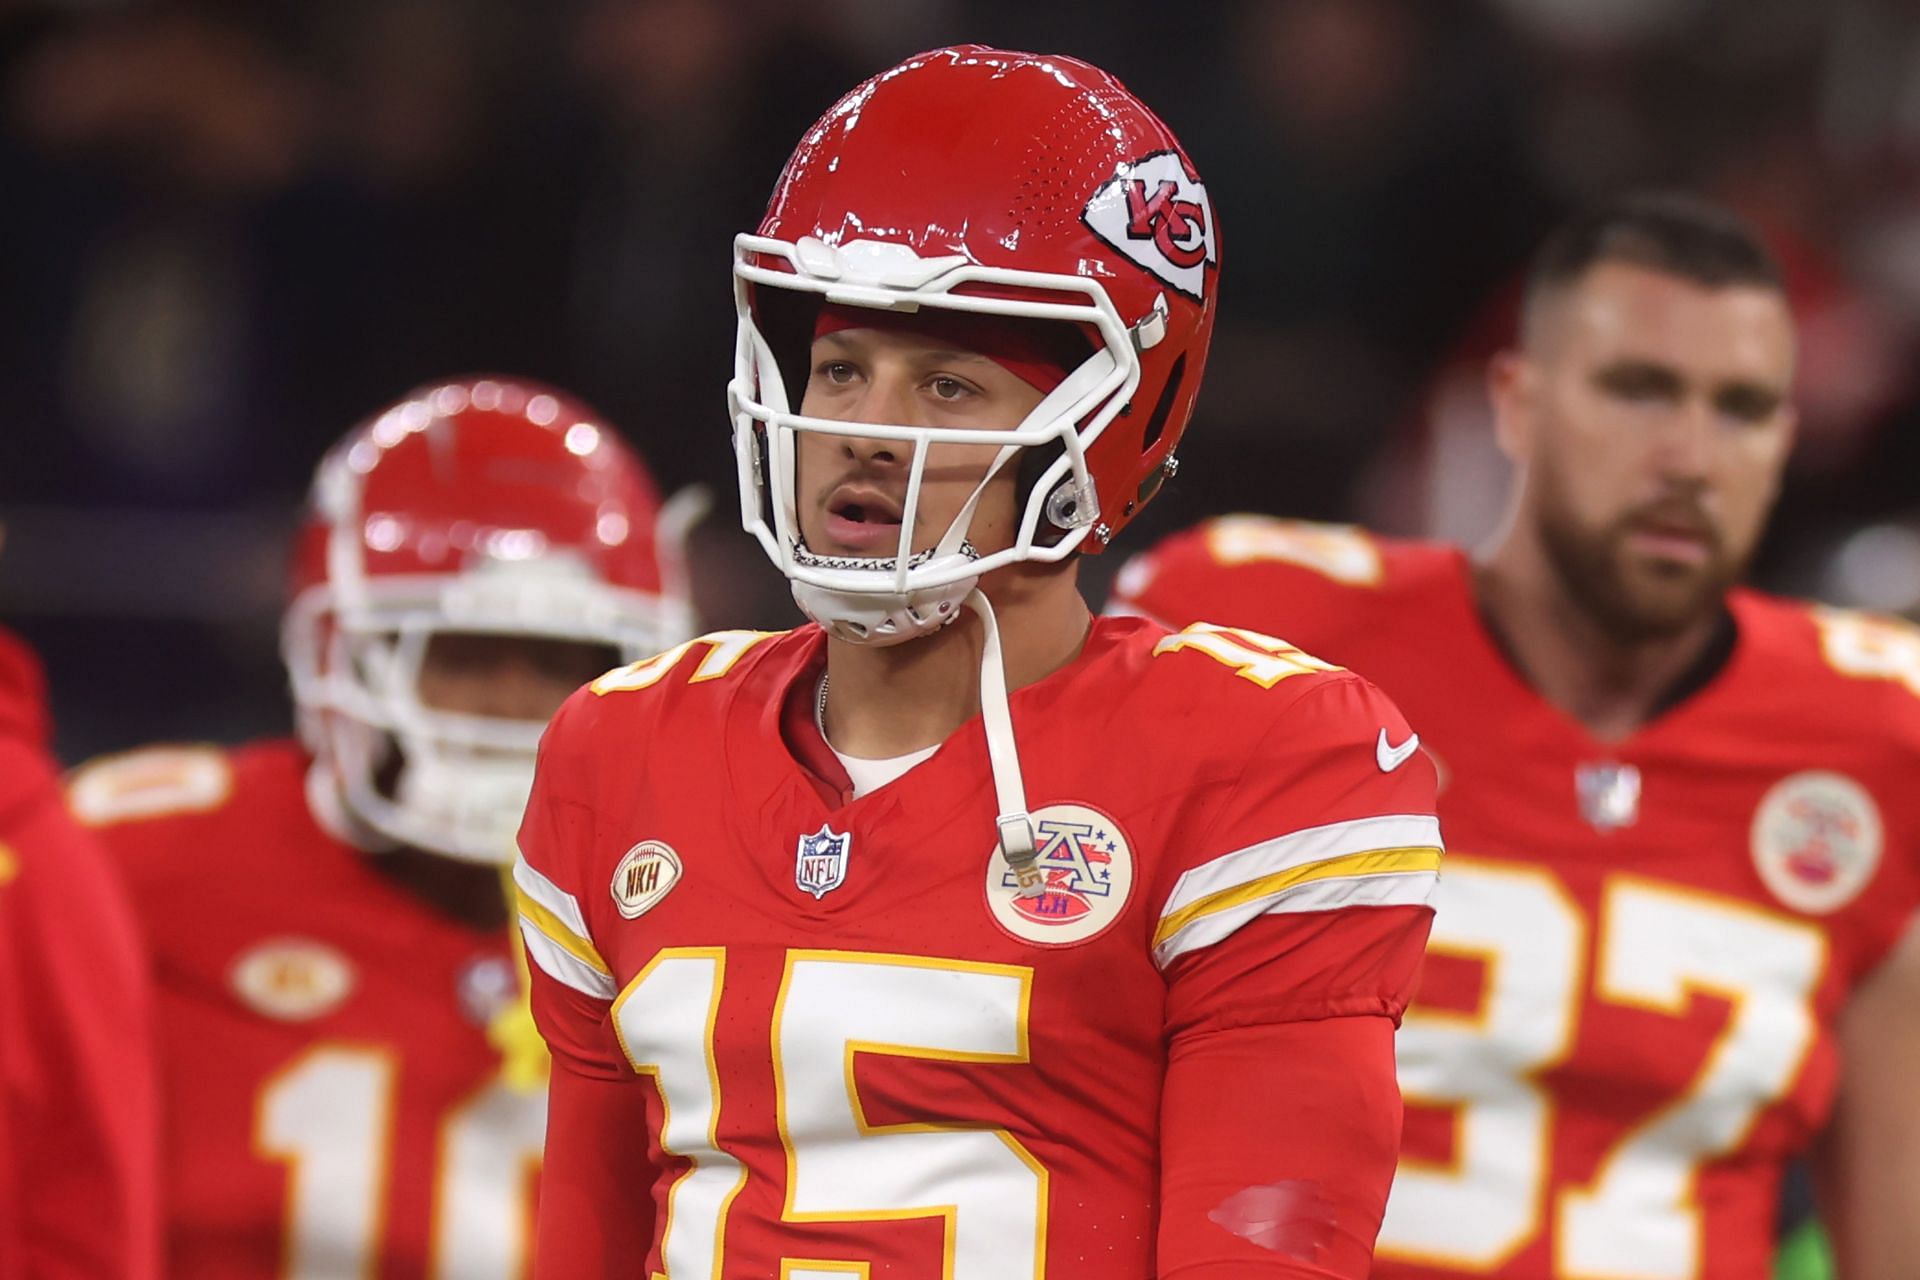 Mike Florio claims Patrick Mahomes and Travis Kelce are getting carried to top AFC seed - “The Chiefs are flawed” - Mnews